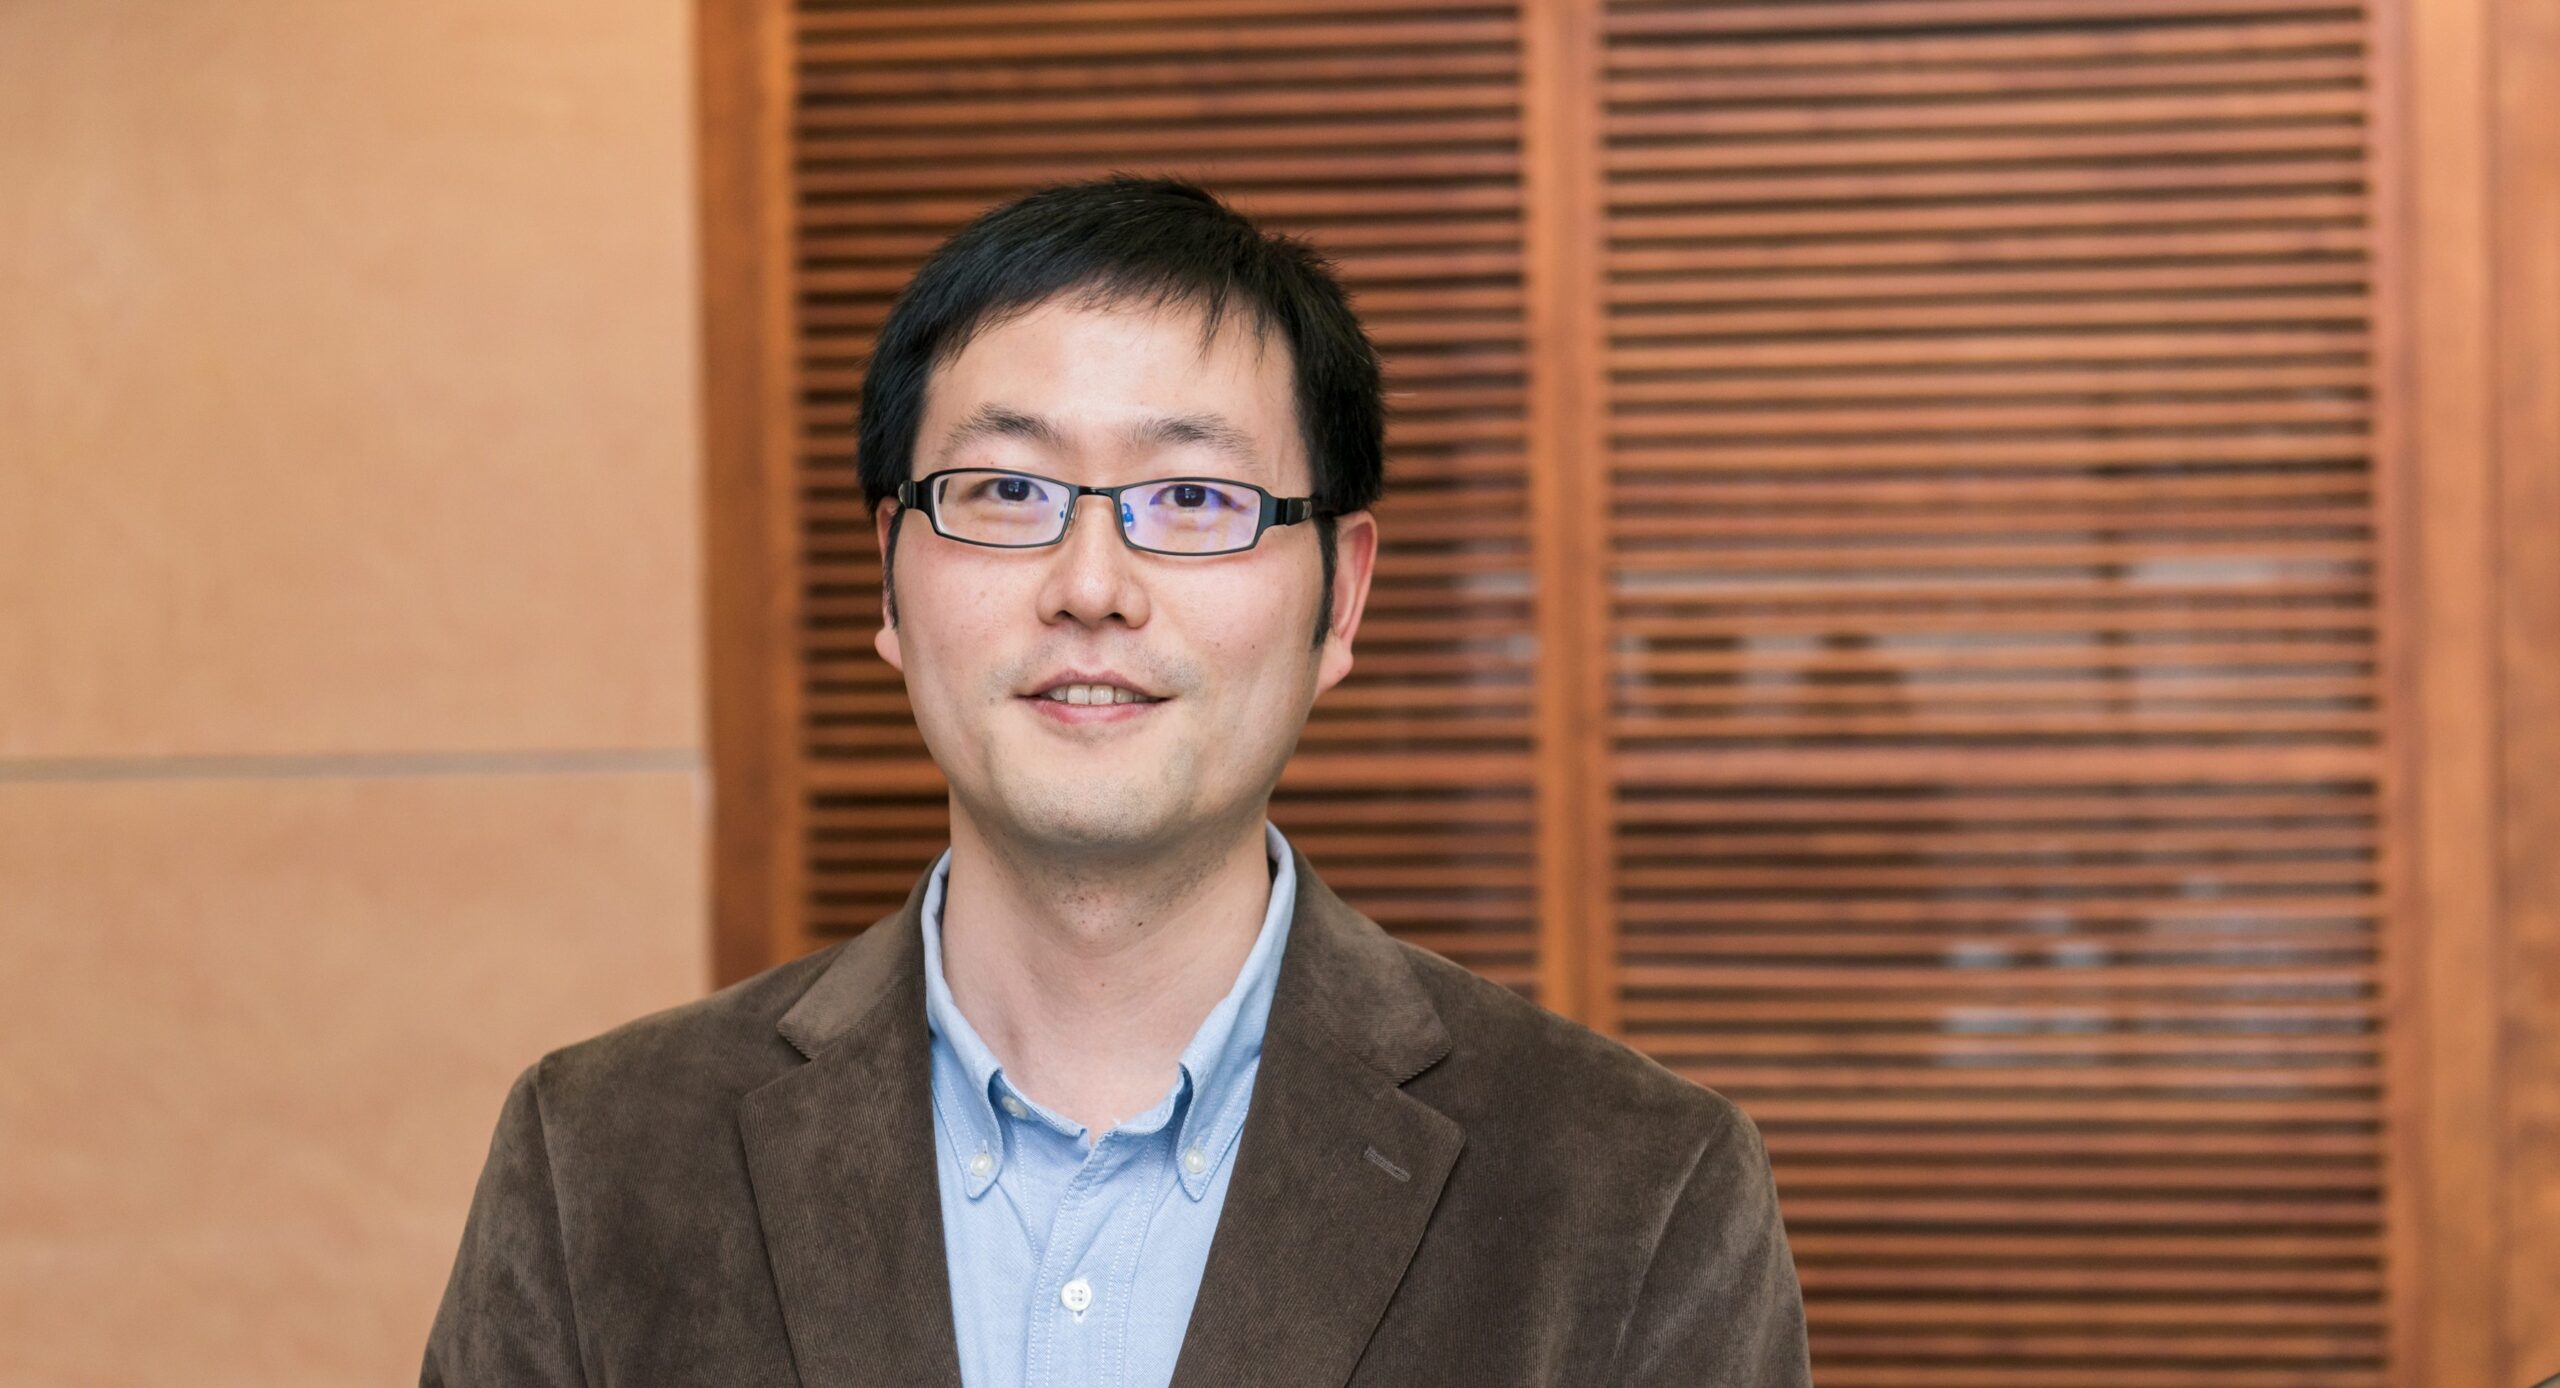 Ting Zhu receives NSF CAREER Award to develop “Internet of Things” technology